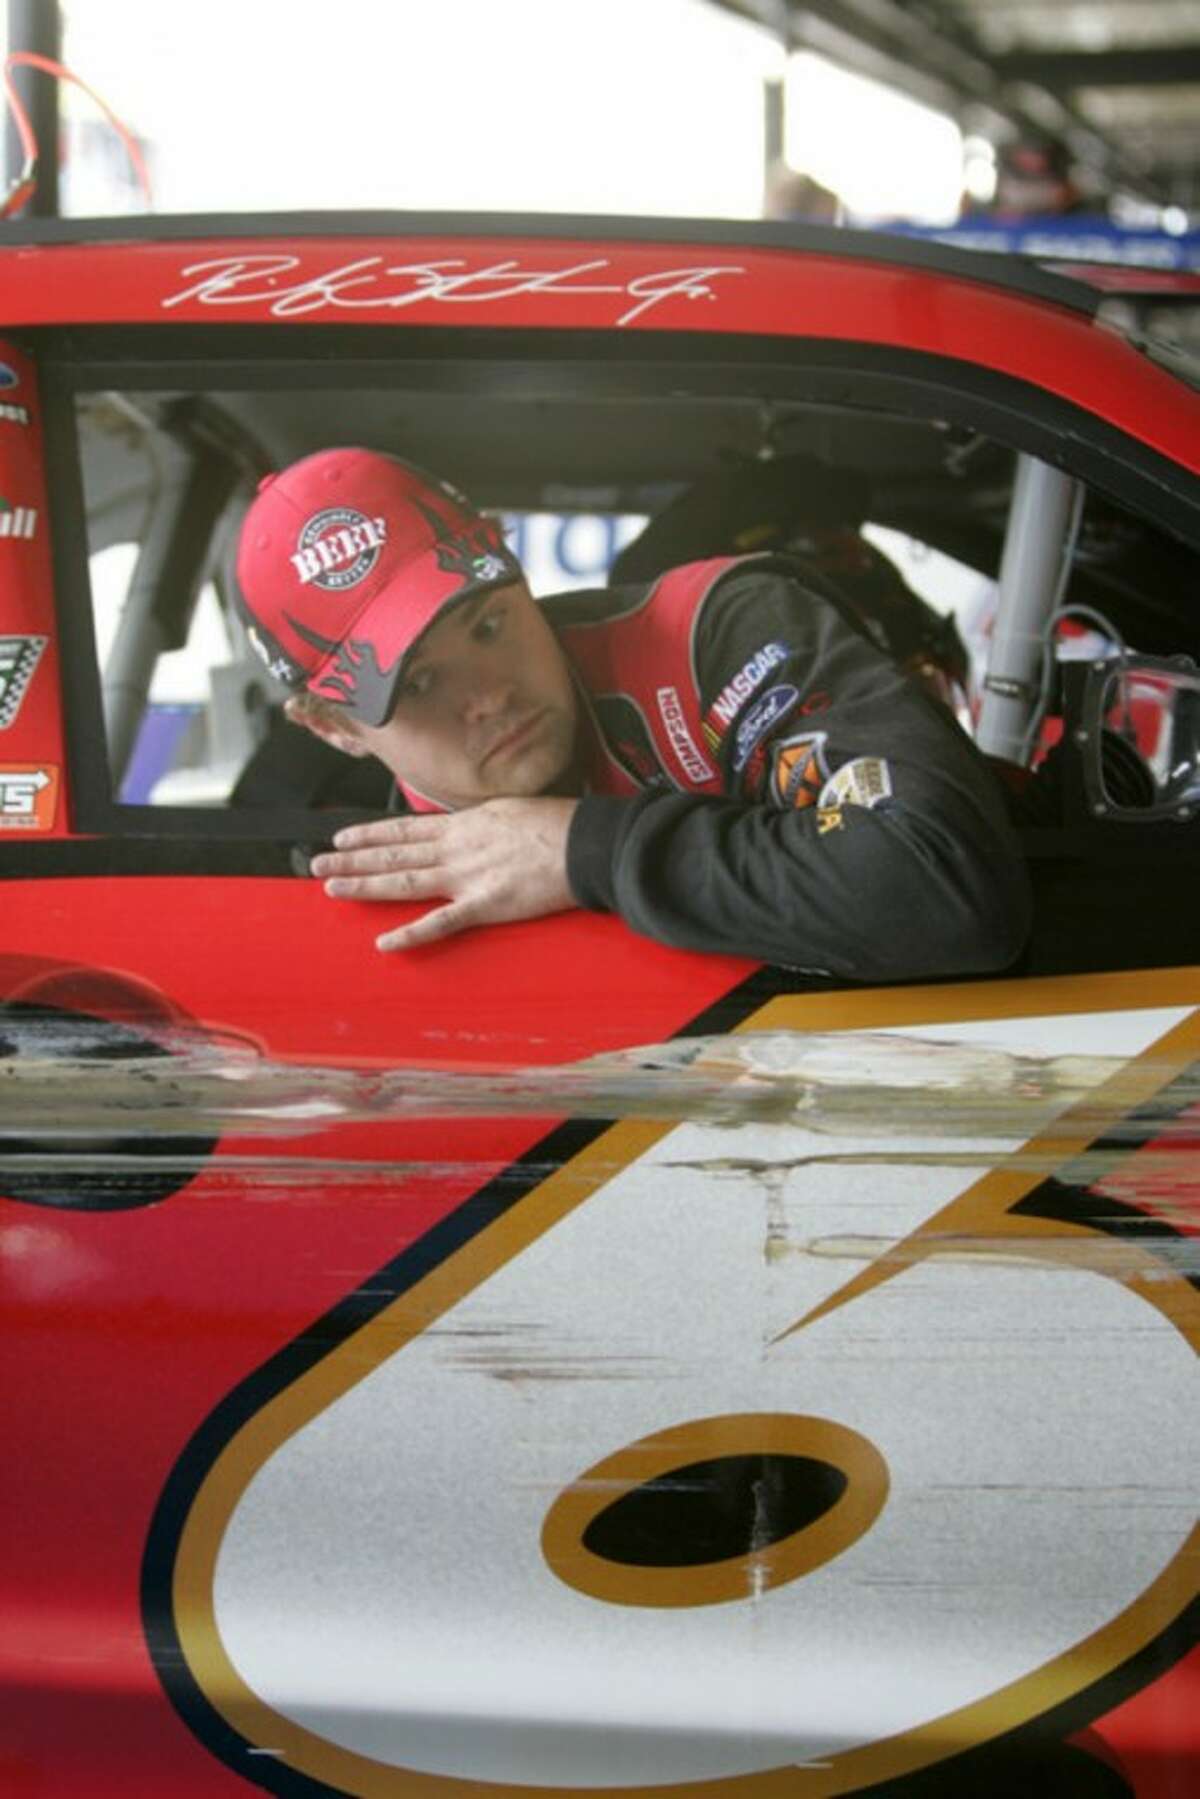 NASCAR driver Ricky Stenhouse Jr. climbs out of his car after hitting the wall at Darlington Raceway during practice for the Nationwide Series auto race, Friday, May 11, 2012 in Darlington, S.C. (AP Photo/Mary Ann Chastain)